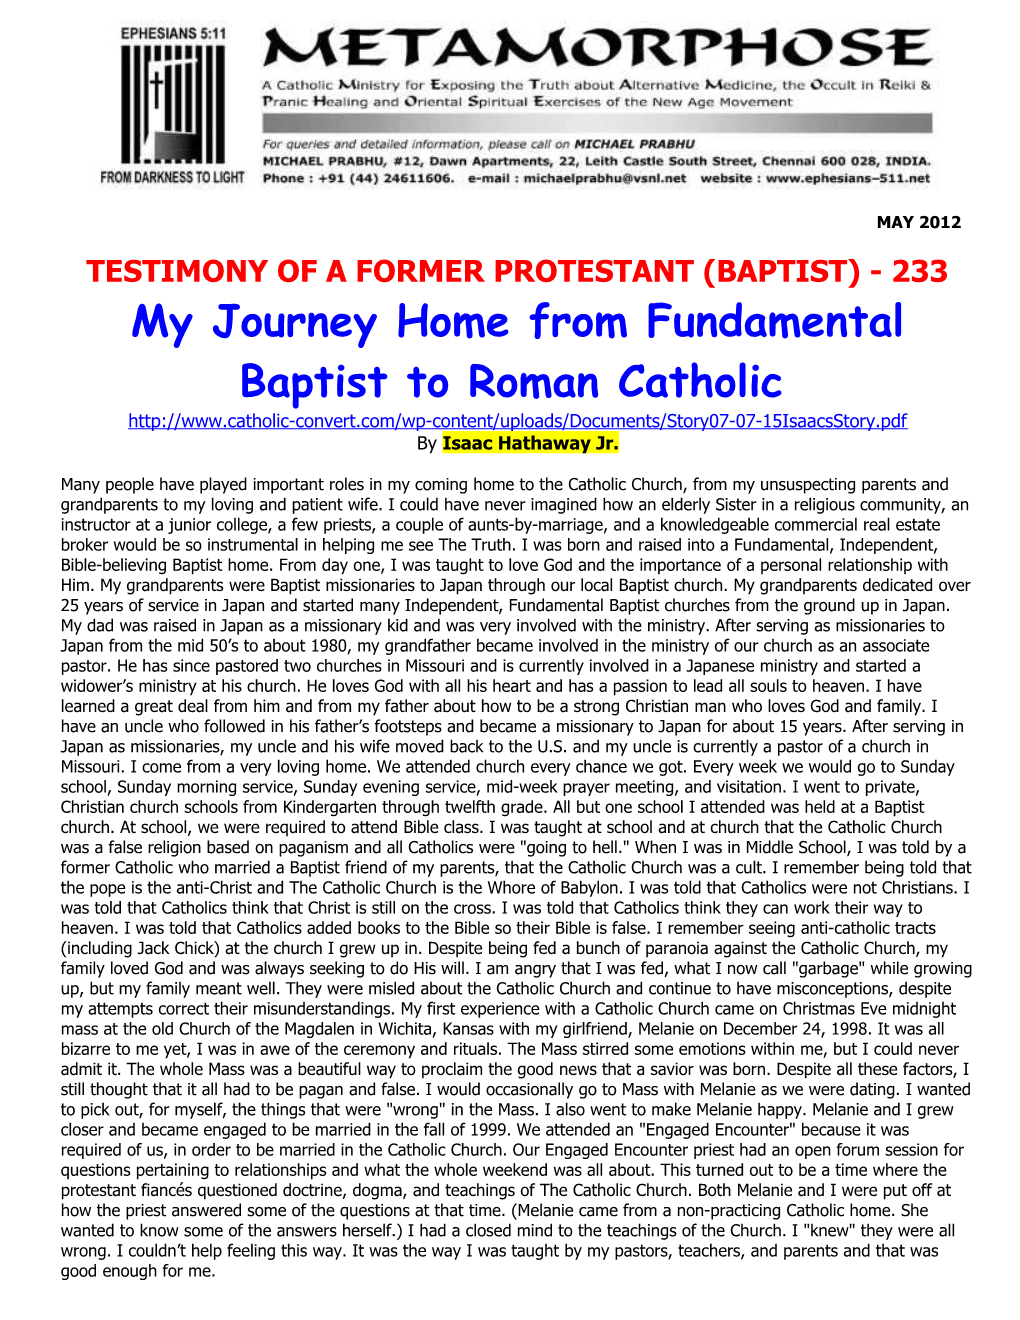 Testimony of a Former Protestant (Baptist) -233